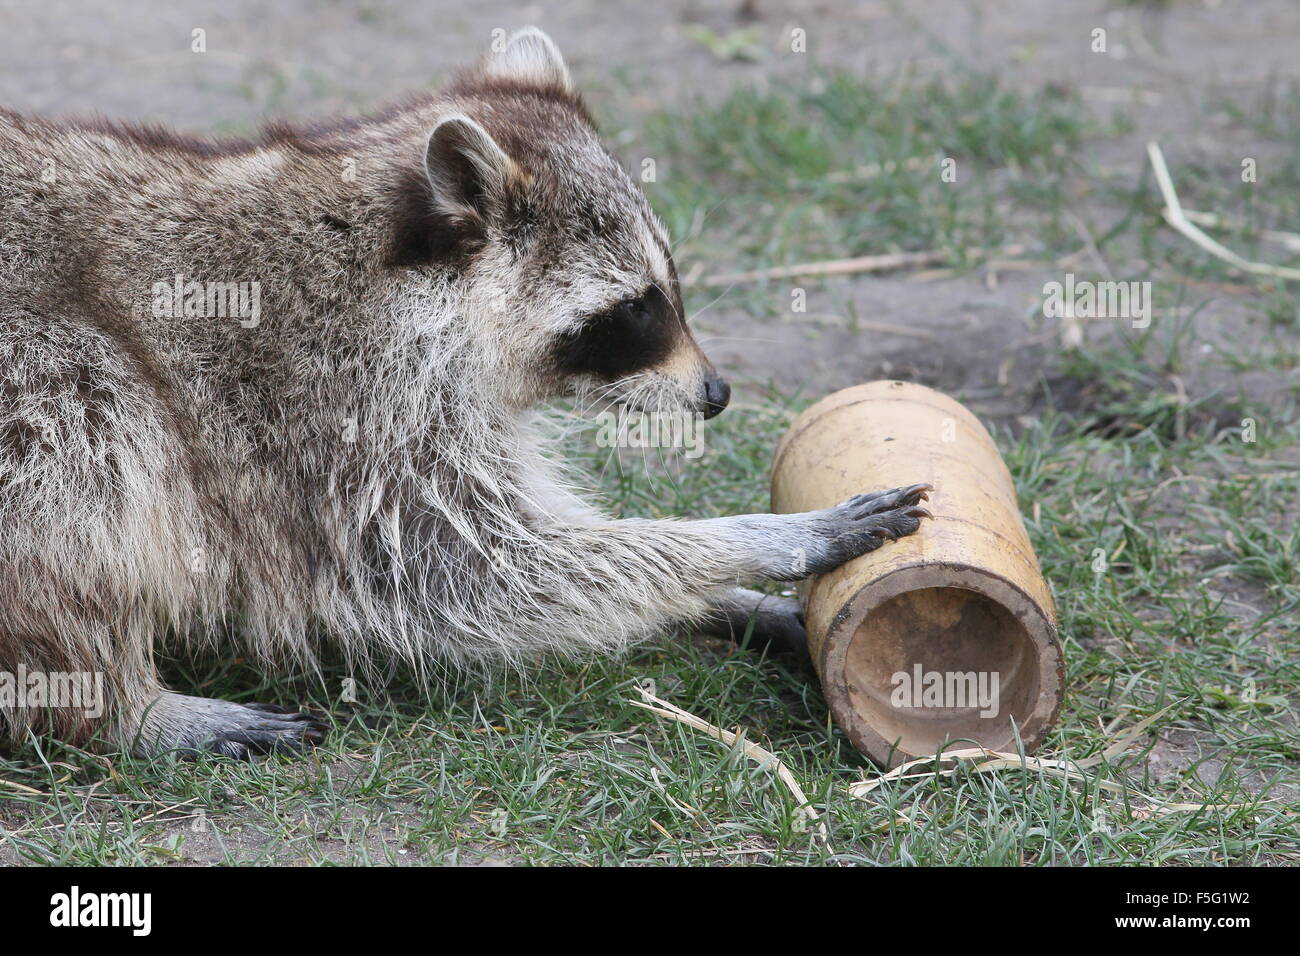 North American raccoon (Procyon lotor) trying to extract a snack from a bamboo casing at Rotterdam Blijdorp Zoo, The Netherlands Stock Photo